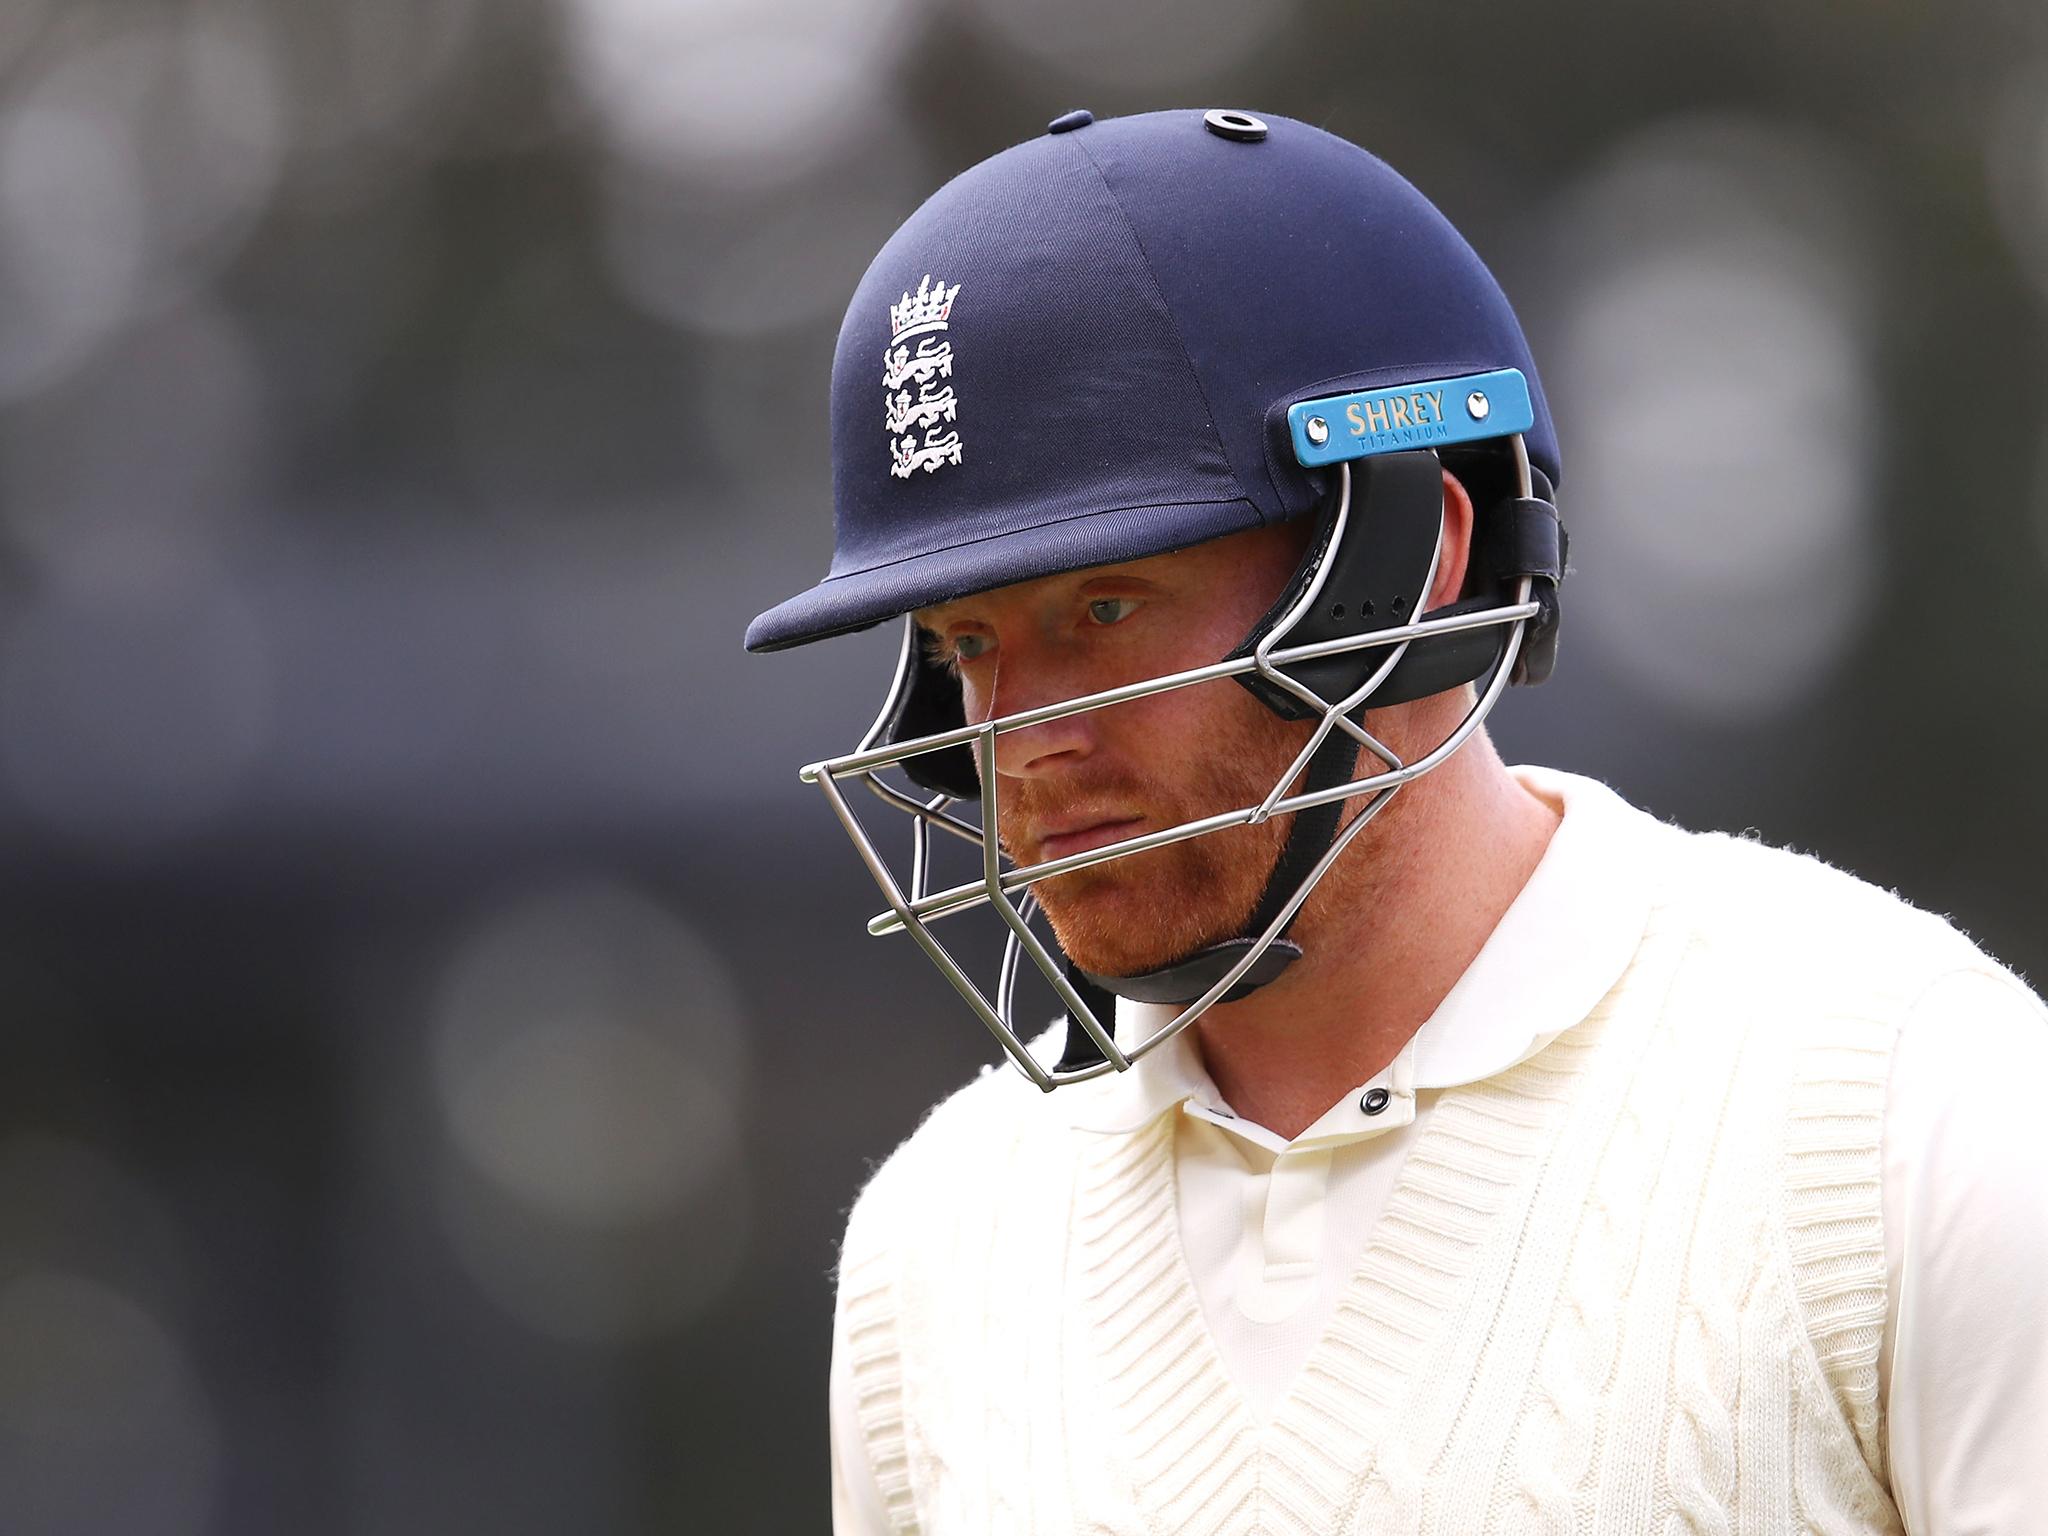 Jonny Bairstow believes he was stitched up by the Australian team over allegations he 'headbutted' Cameron Bancroft